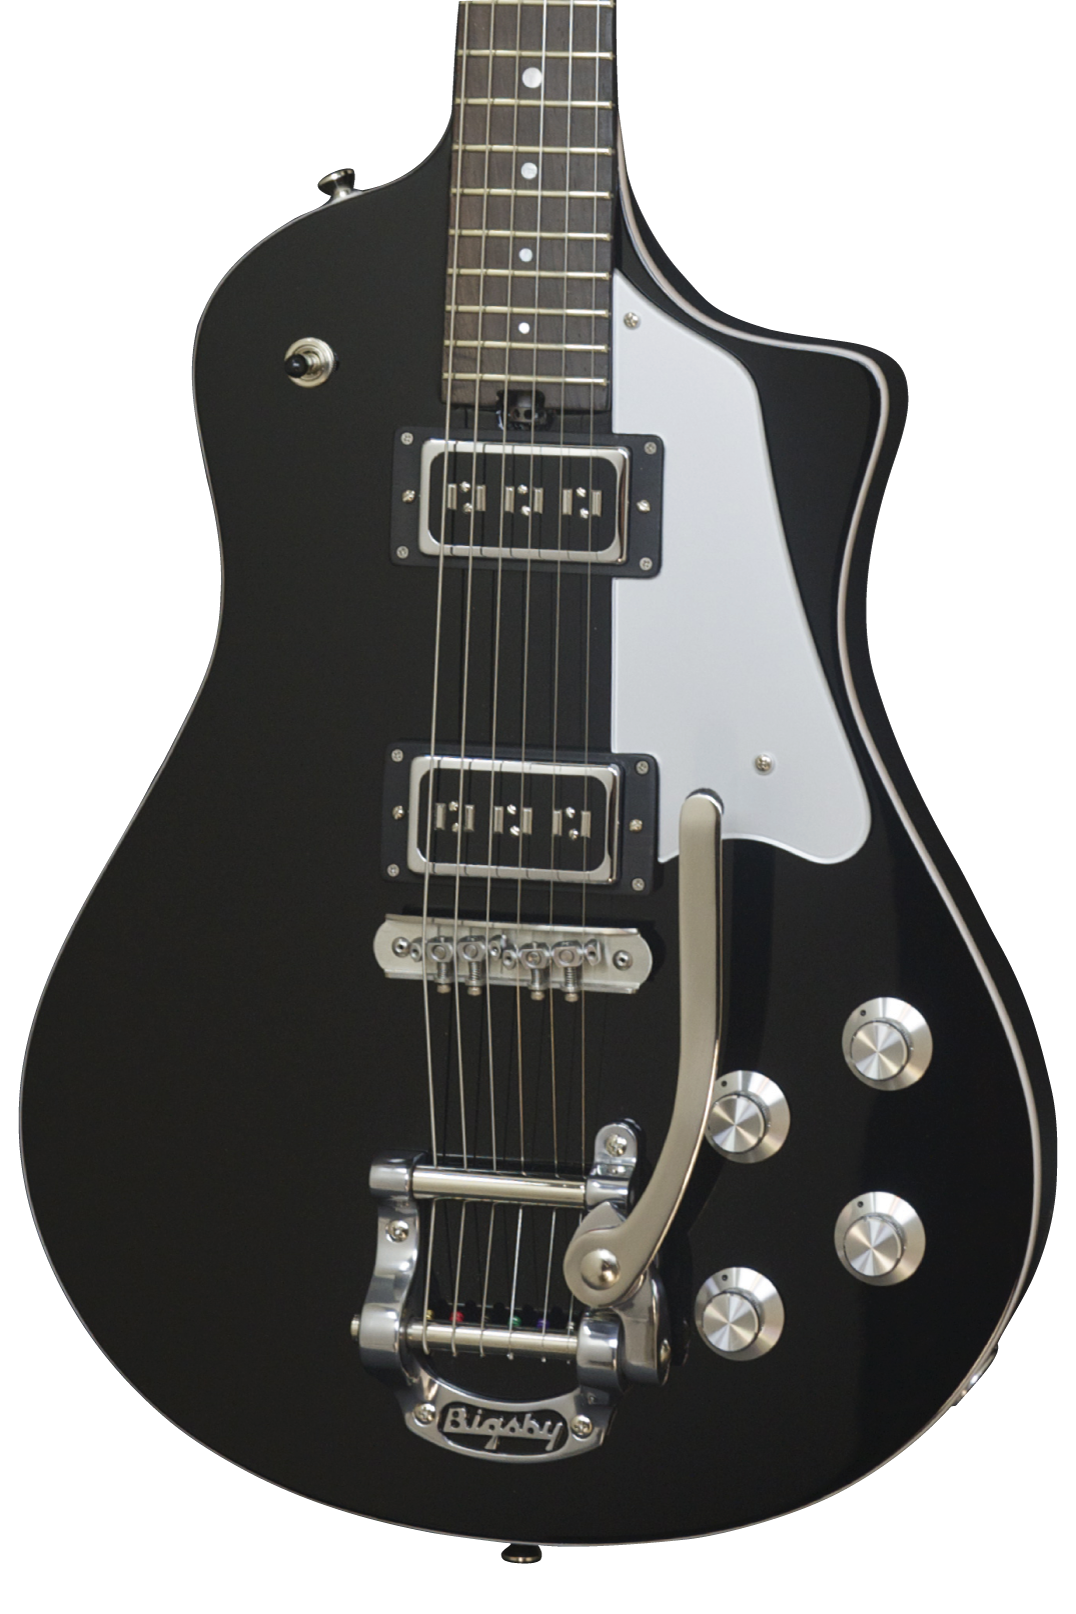 SOLD Asher 2016 Electro Sonic Neck Thru - Black Beauty with Bigsby #909